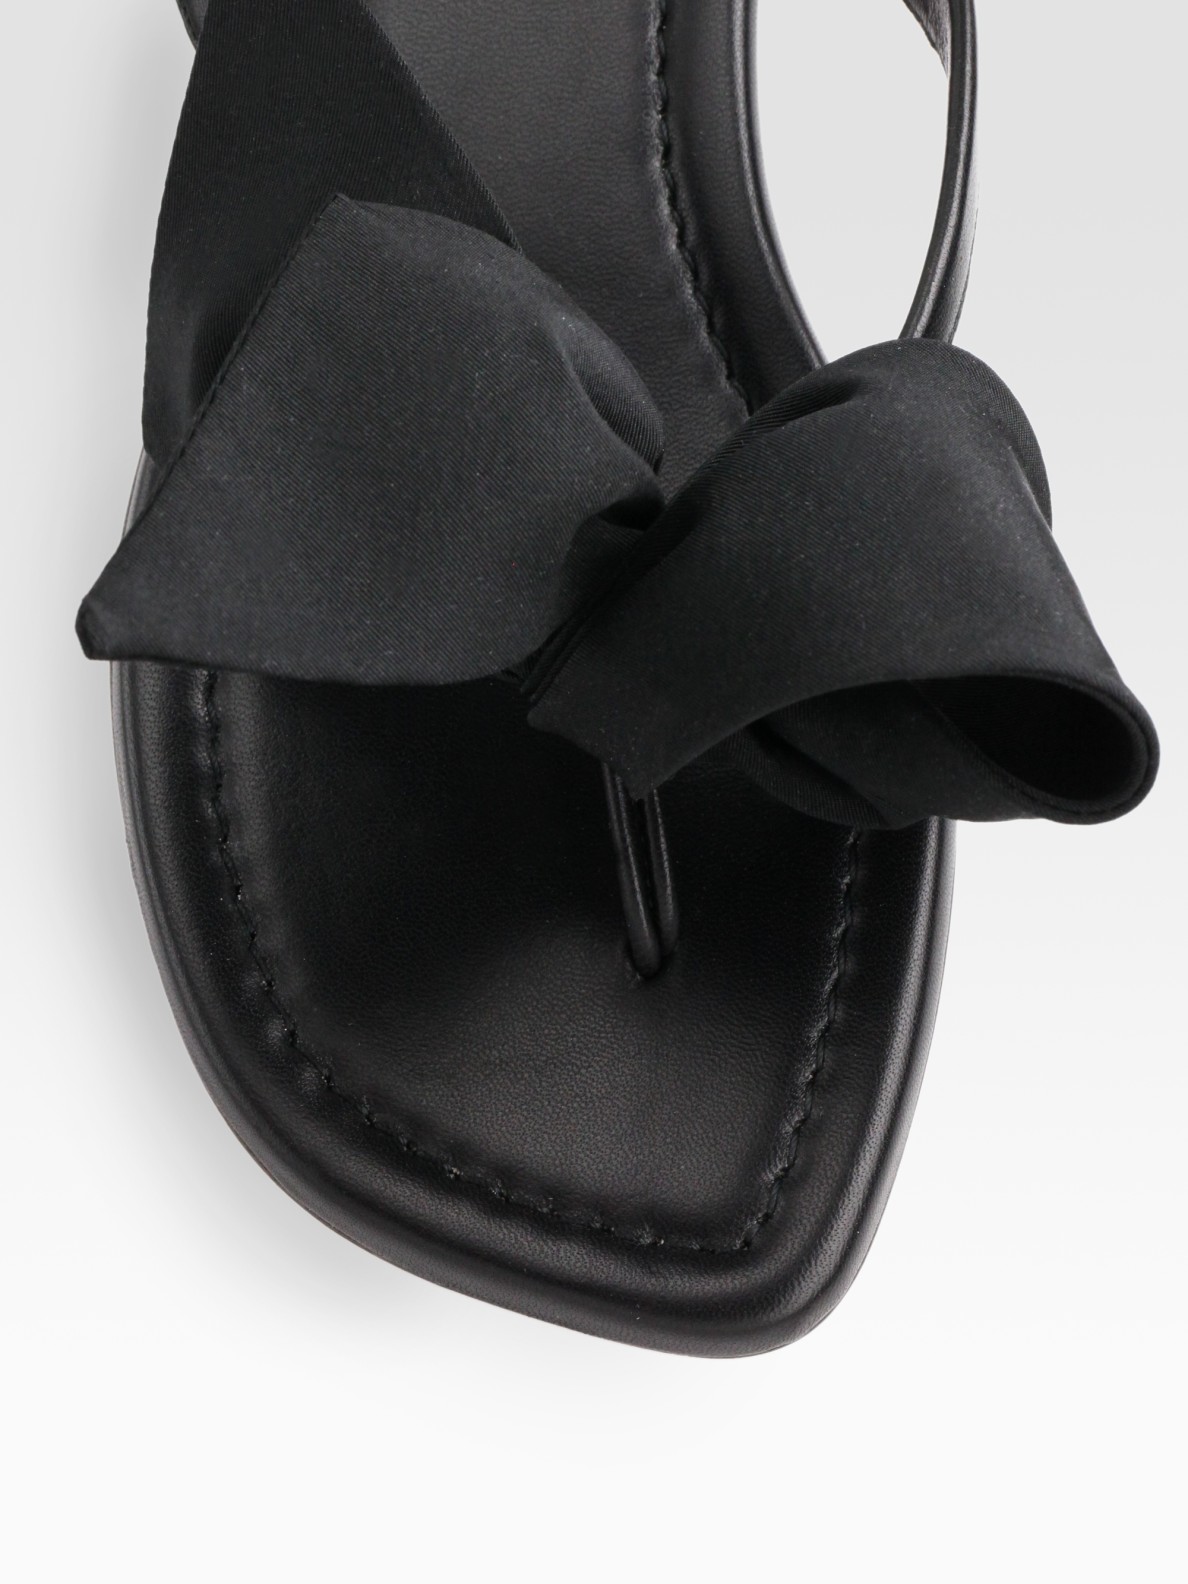 Christian louboutin Leather & Nylon Bow Thong Sandals in Black | Lyst